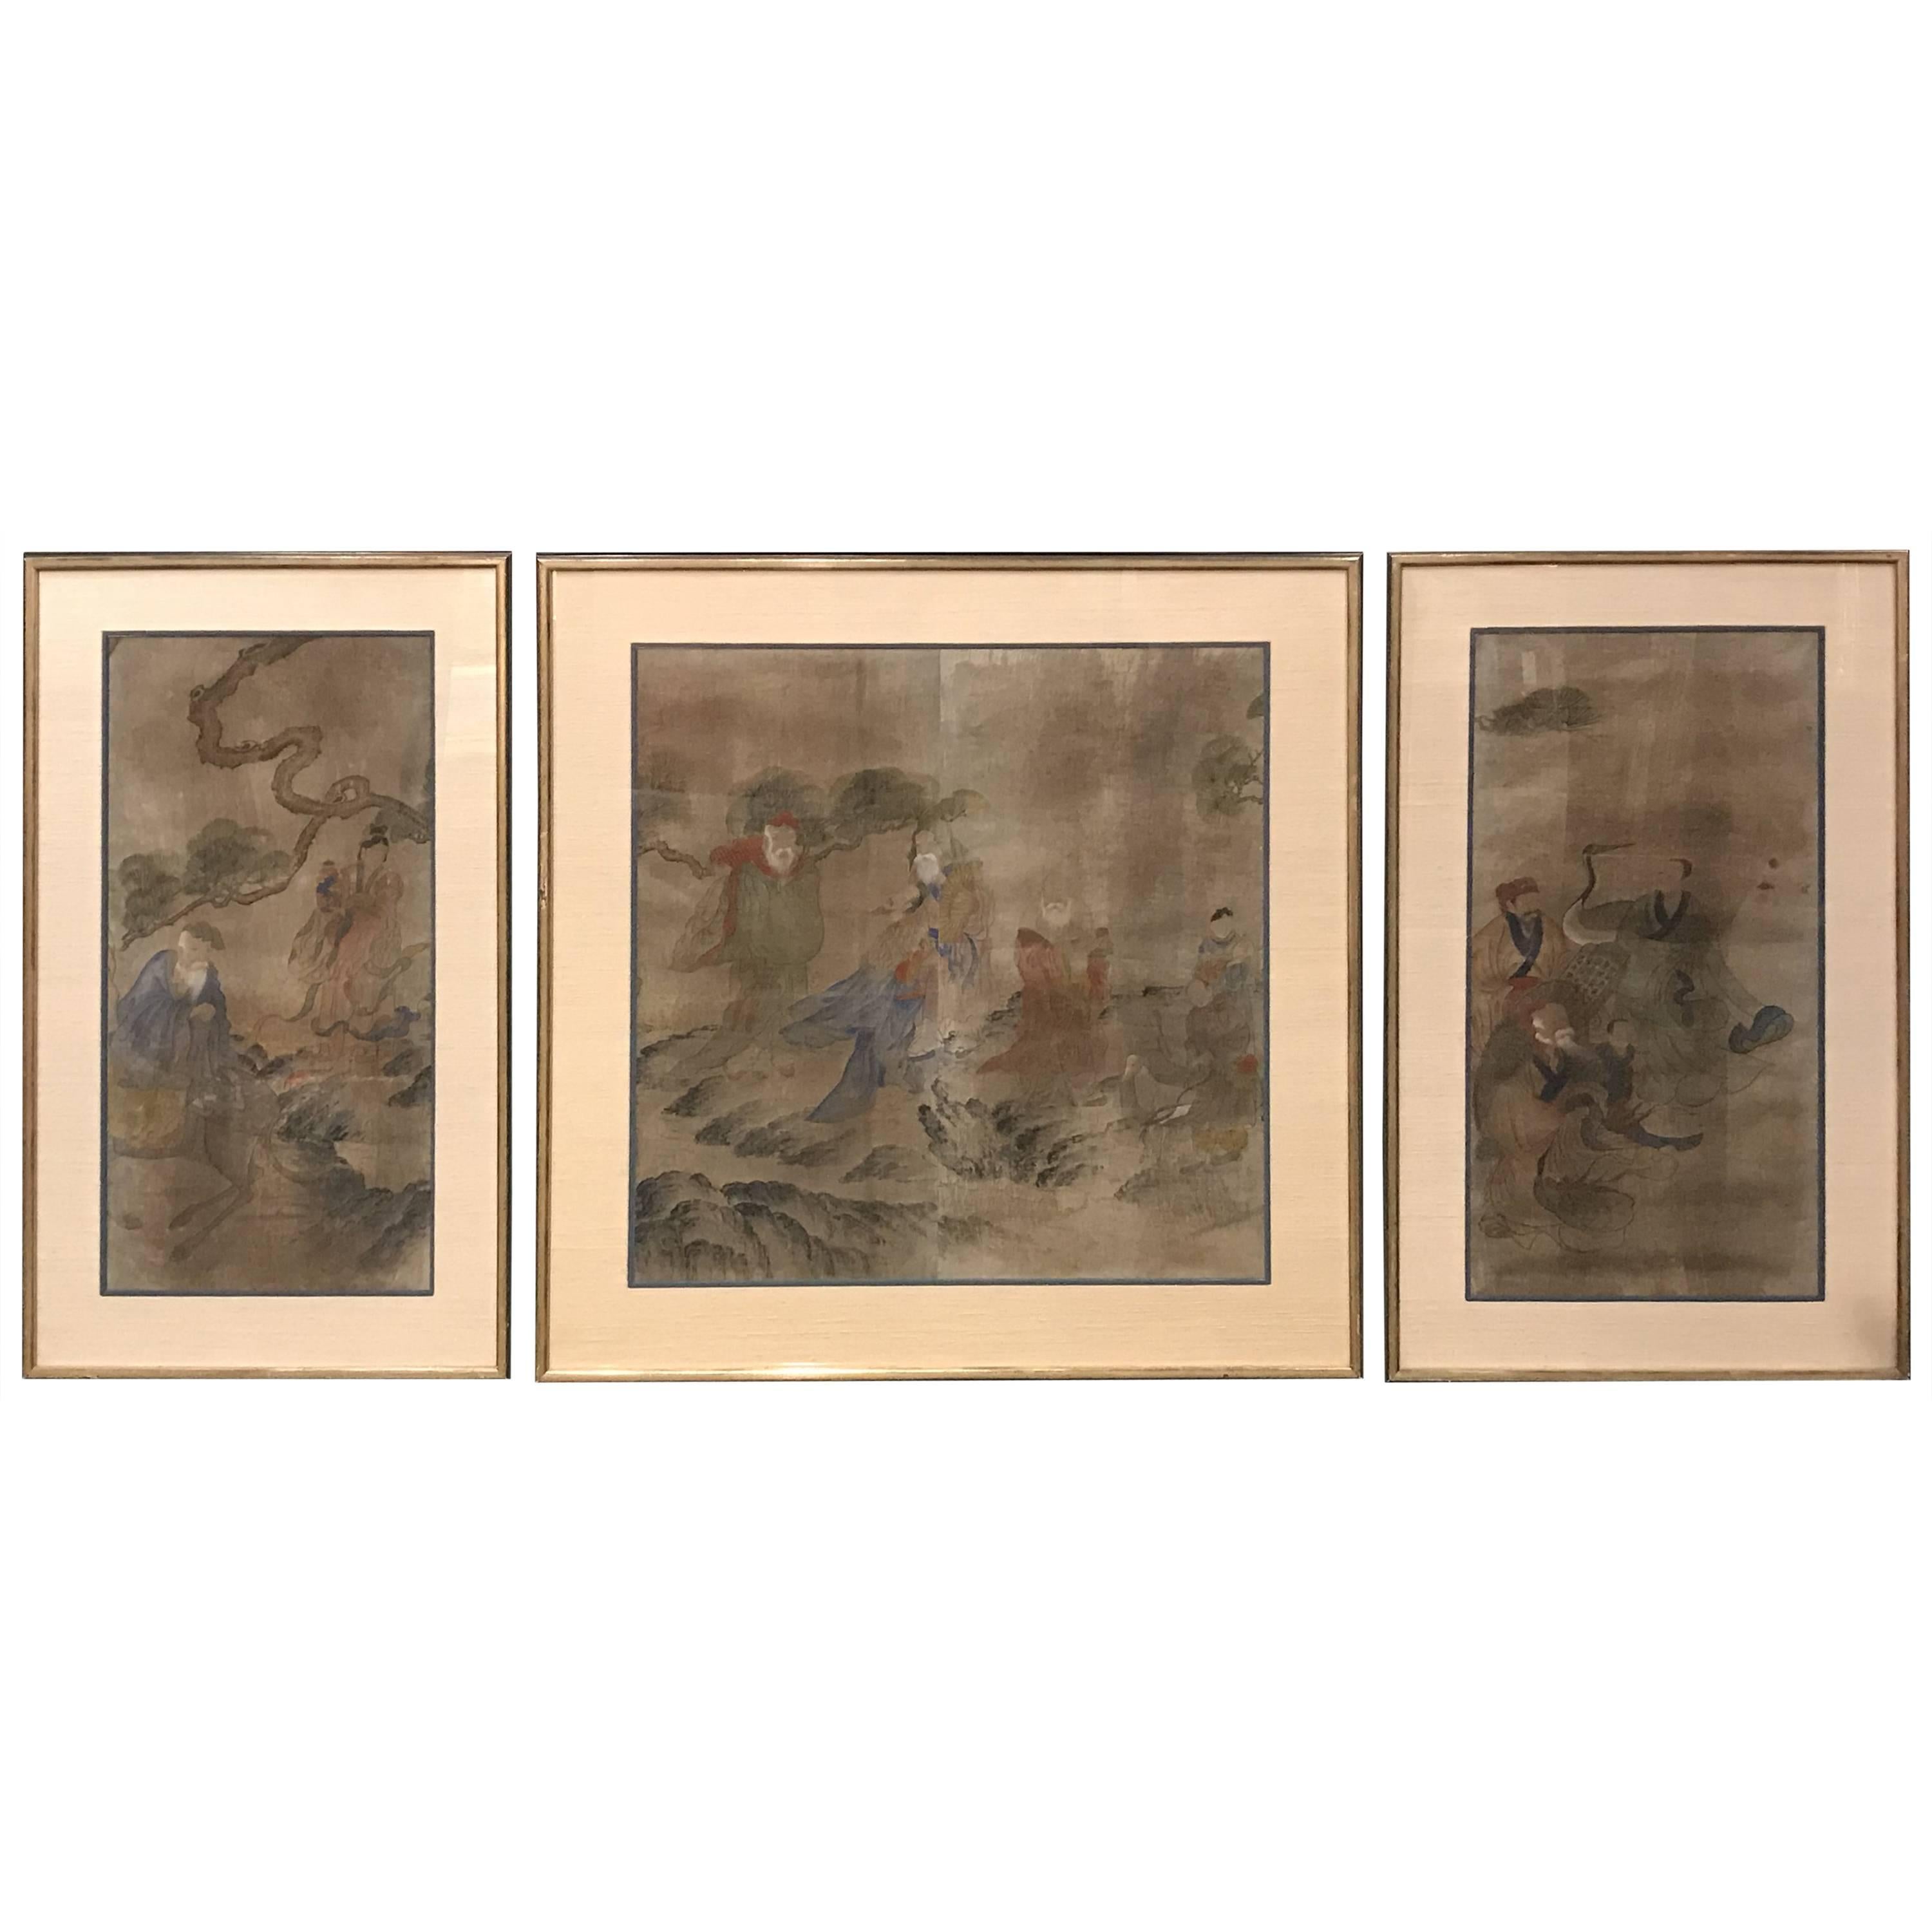 Early Yi Dynasty Korean Painted Triptych on Silk with Folklore Figures